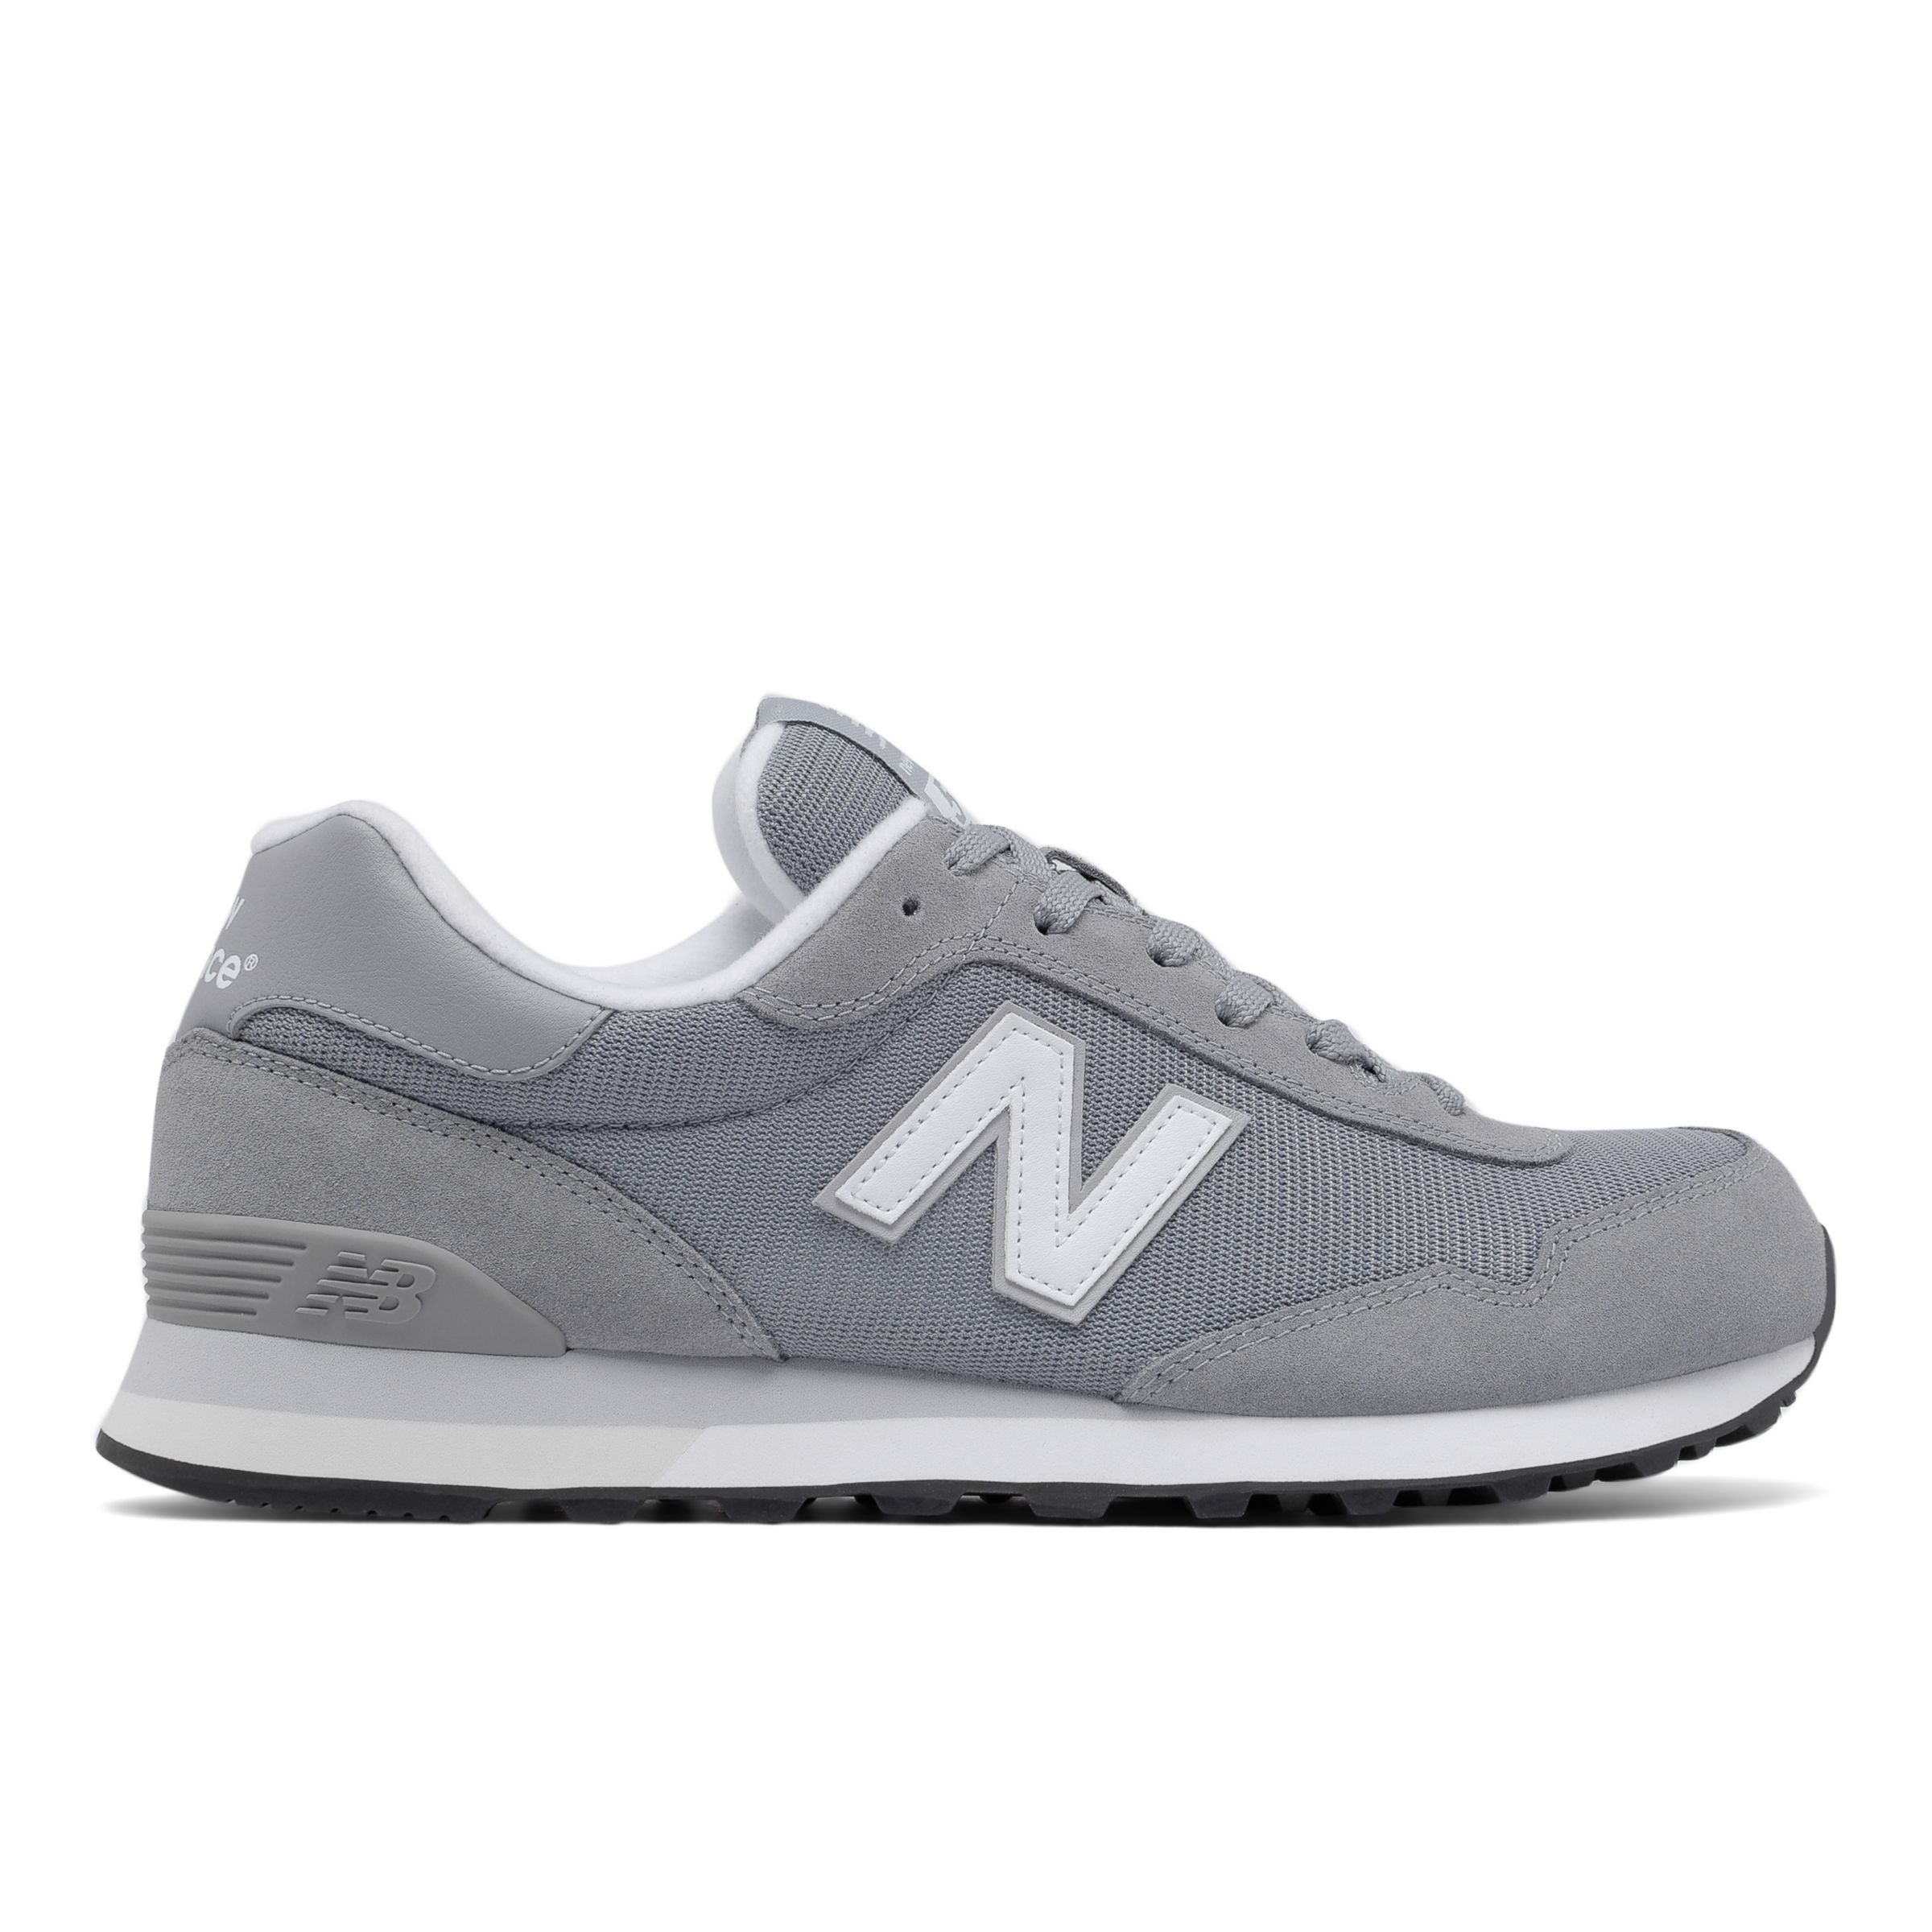 New Balance Outlet Online - Shop Now 